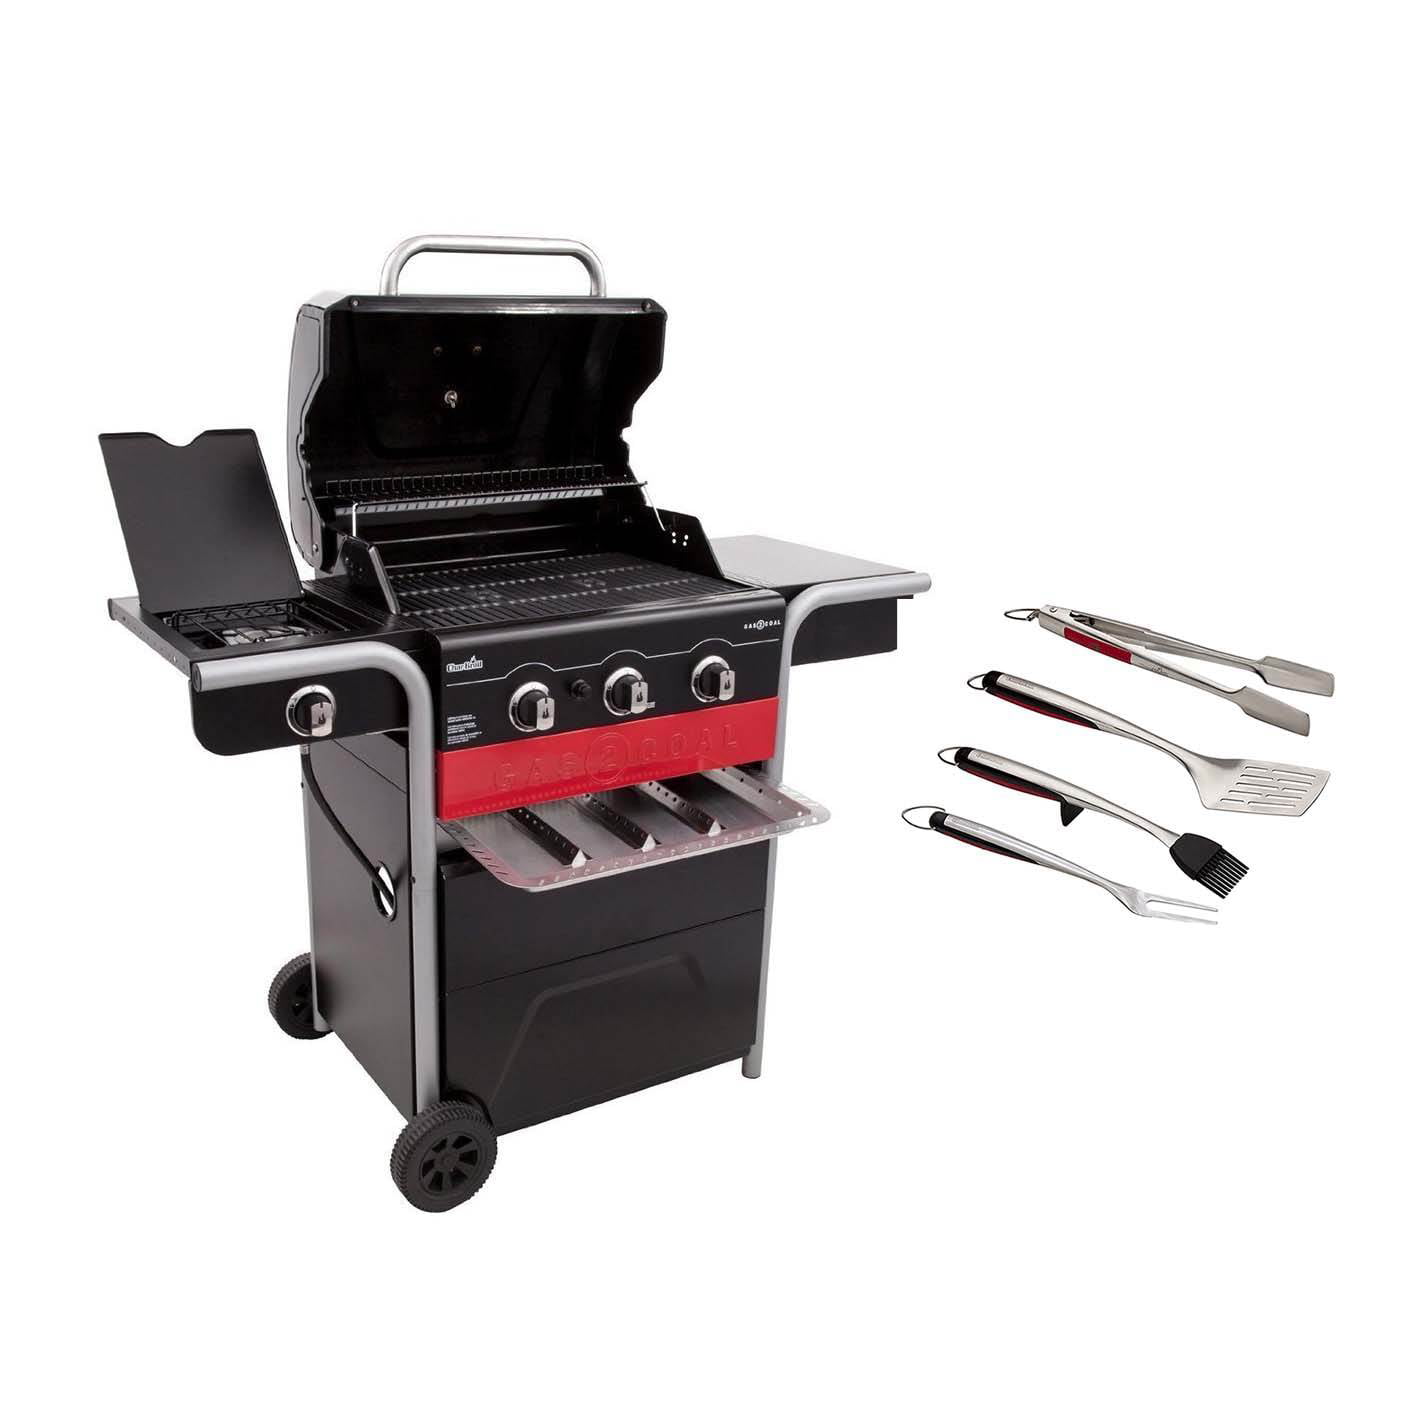 Char-Broil Gas2Coal 3-Burner Gas and Charcoal Grill for sale online 